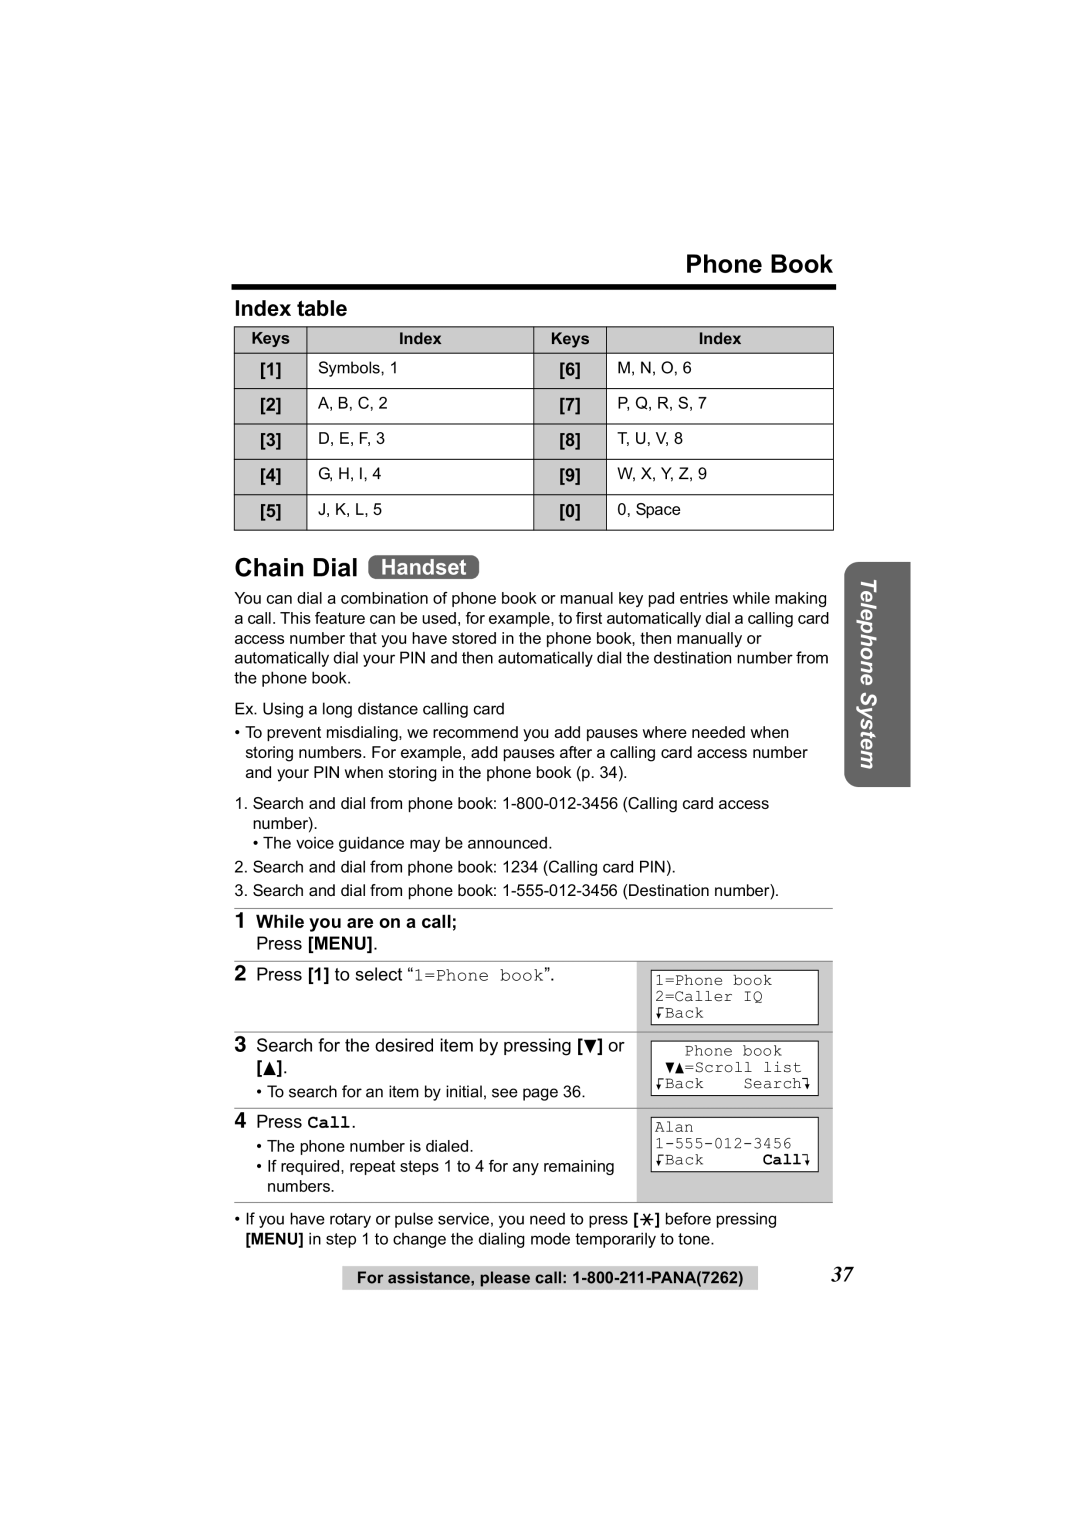 Panasonic KX-TG2344 manual Chain Dial Handset, Index table, While you are on a call Press Menu 